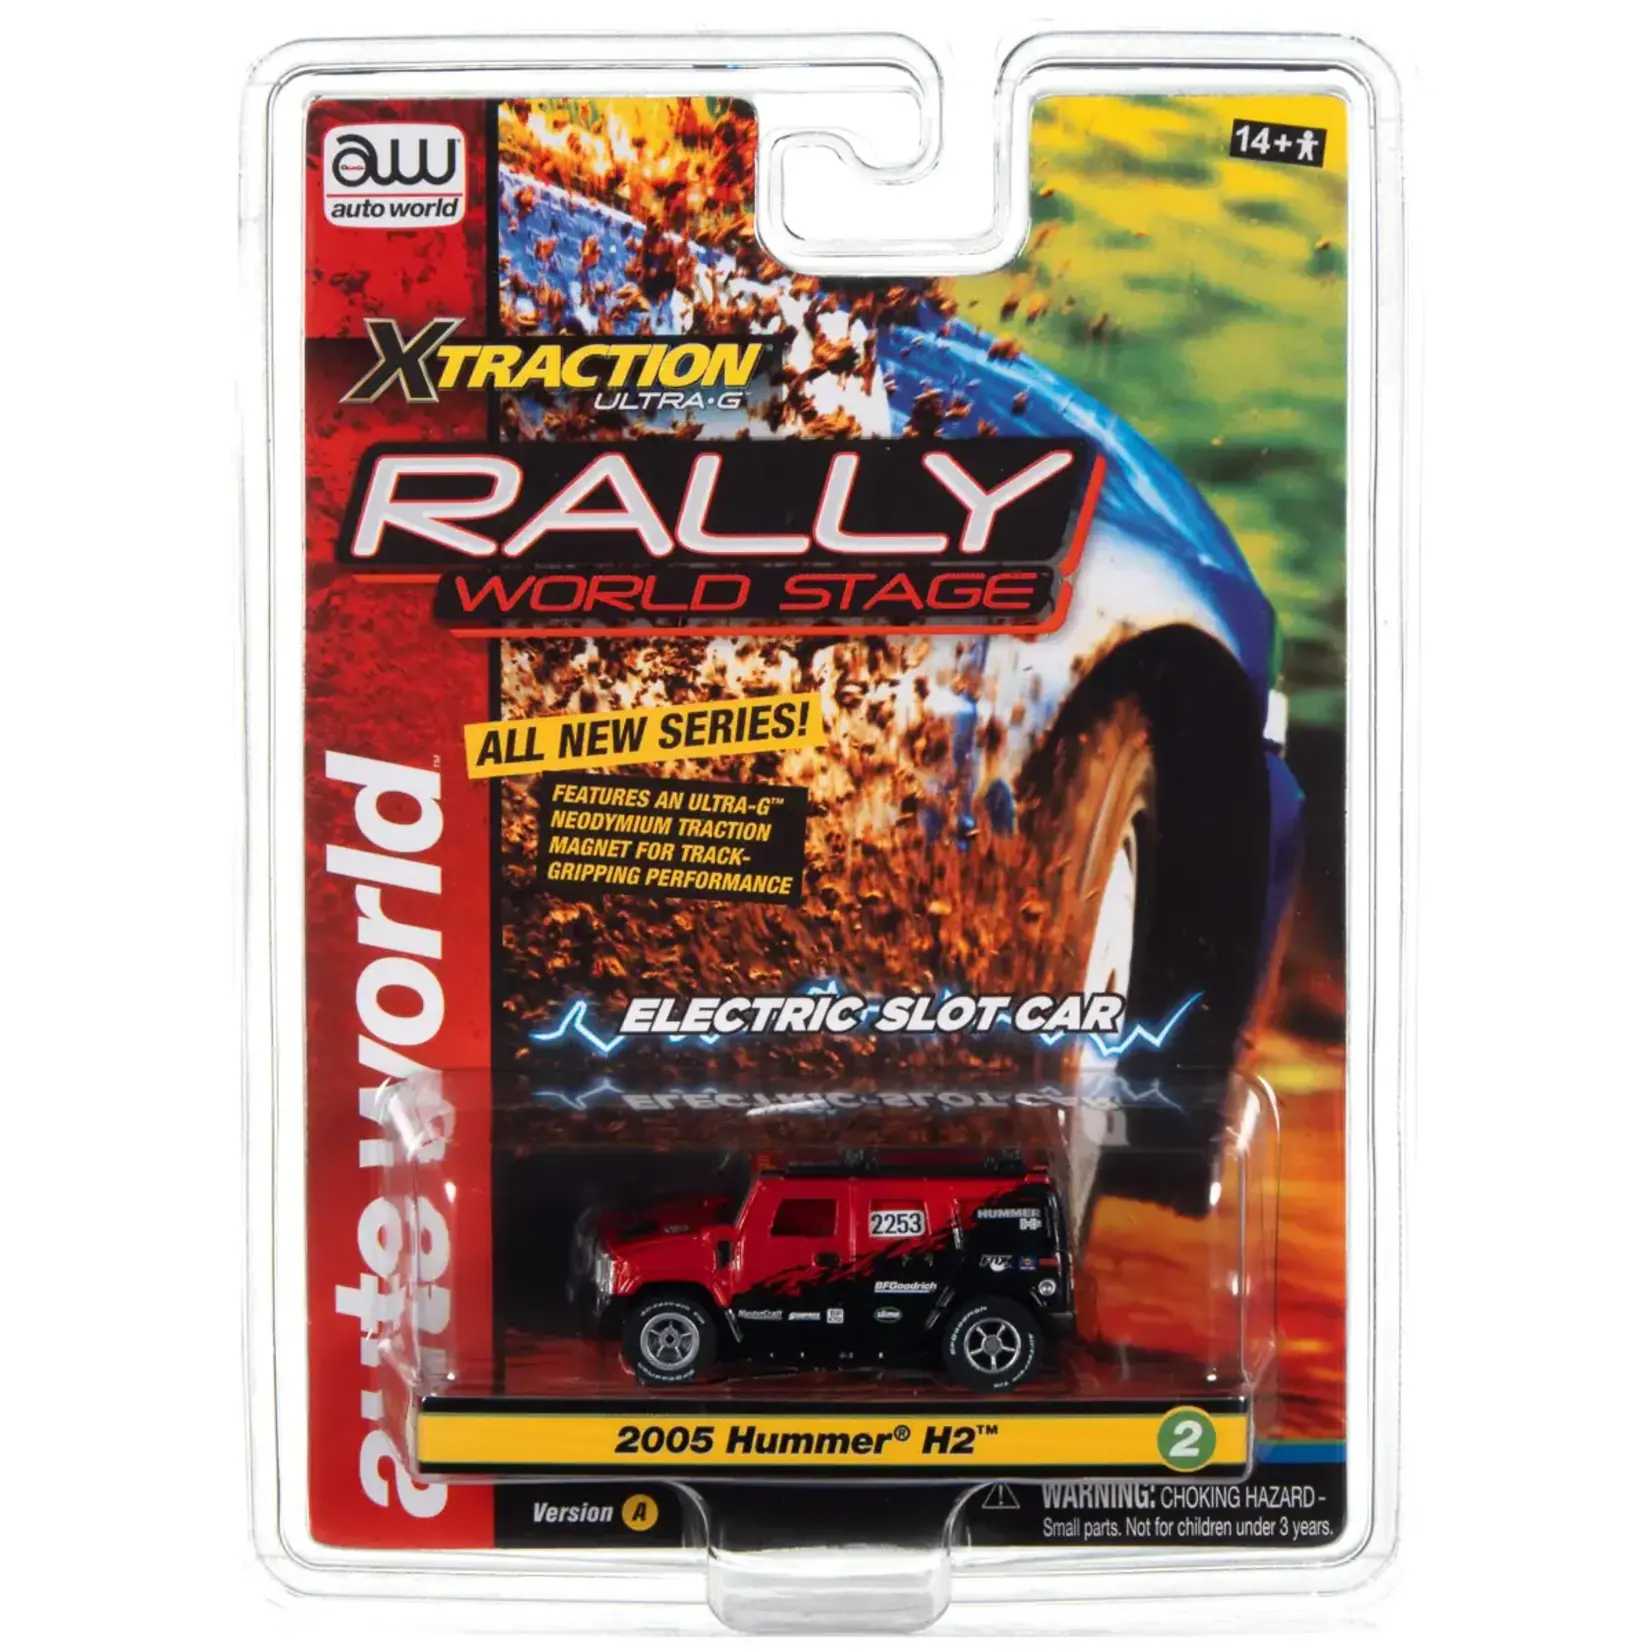 Auto World SC380A2 Auto World Xtraction Rally 2005 Hummer H2 (red) HO Scale Slot Car